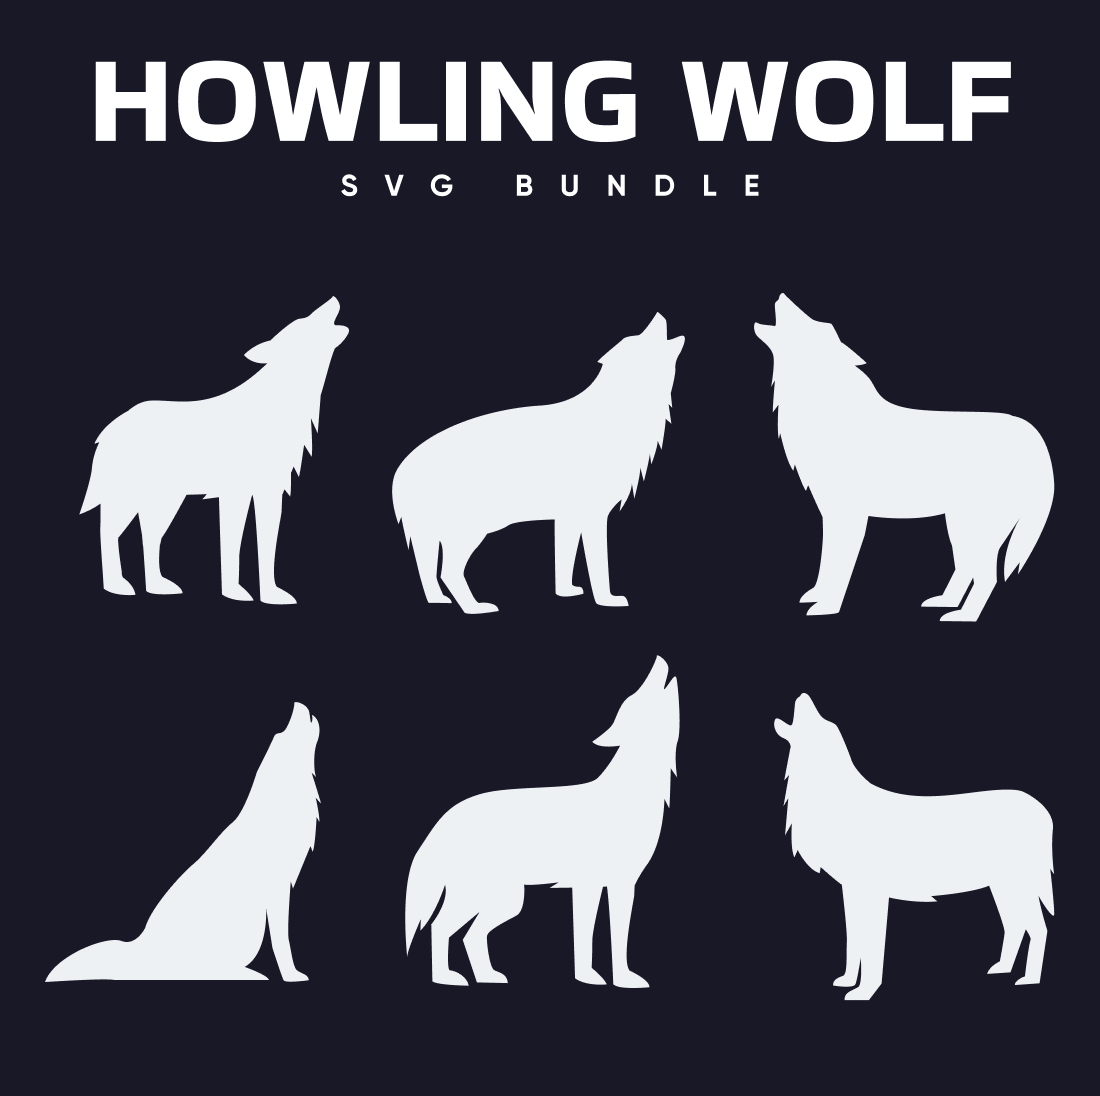 The howling wolf svg bundle.